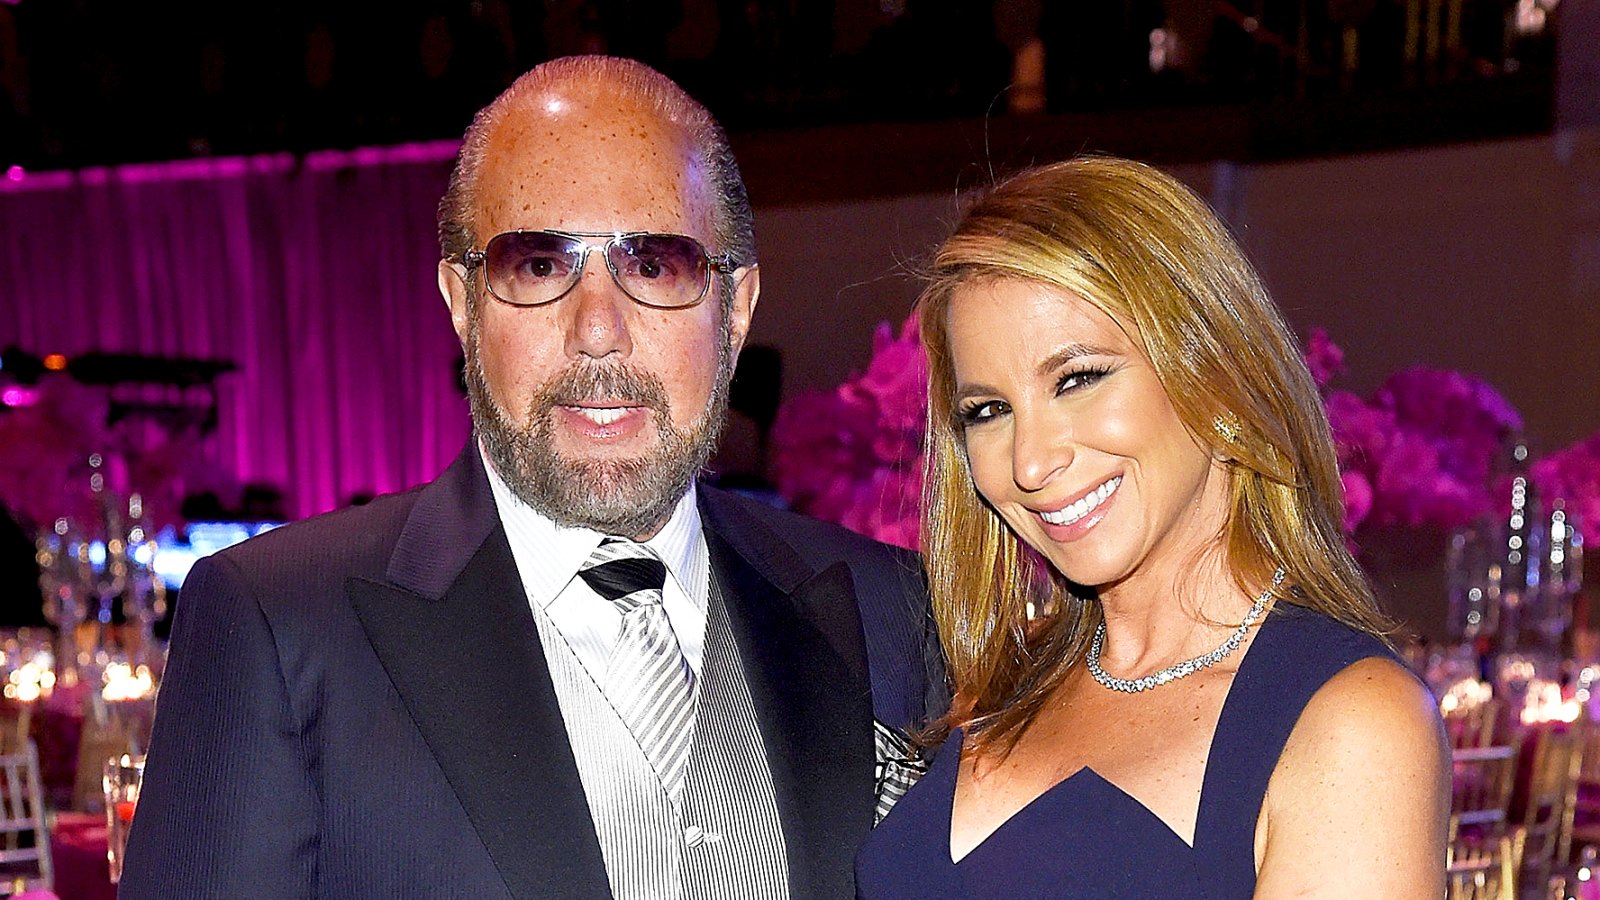 Bobby Zarin and Jill Zarin attend 2016 Angel Ball hosted by Gabrielle's Angel Foundation For Cancer Research in New York City.